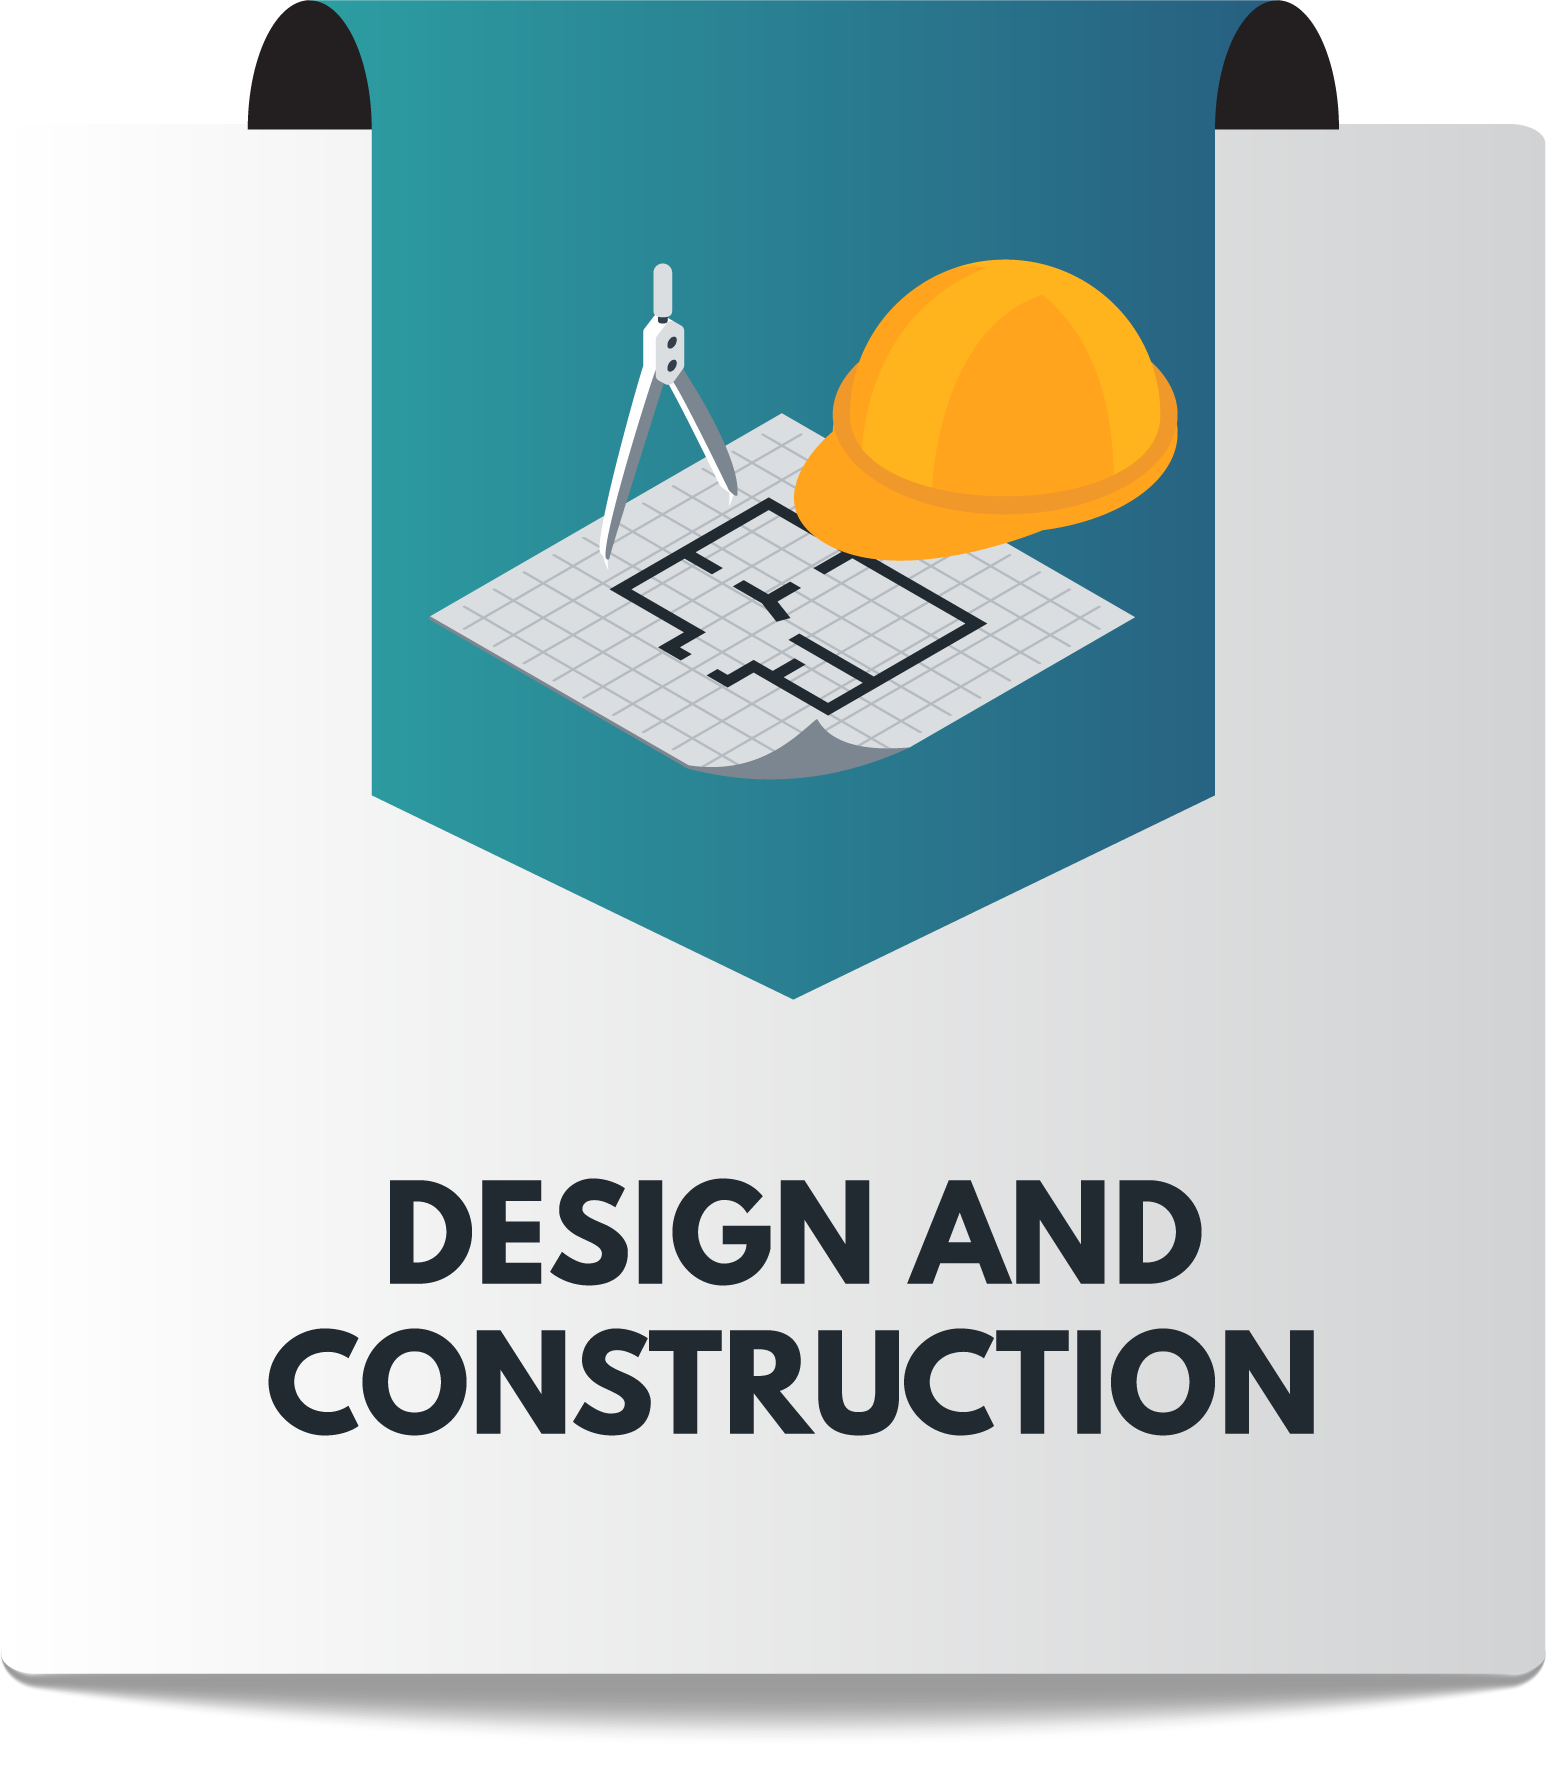 Click here to visit the Division of Construction website.